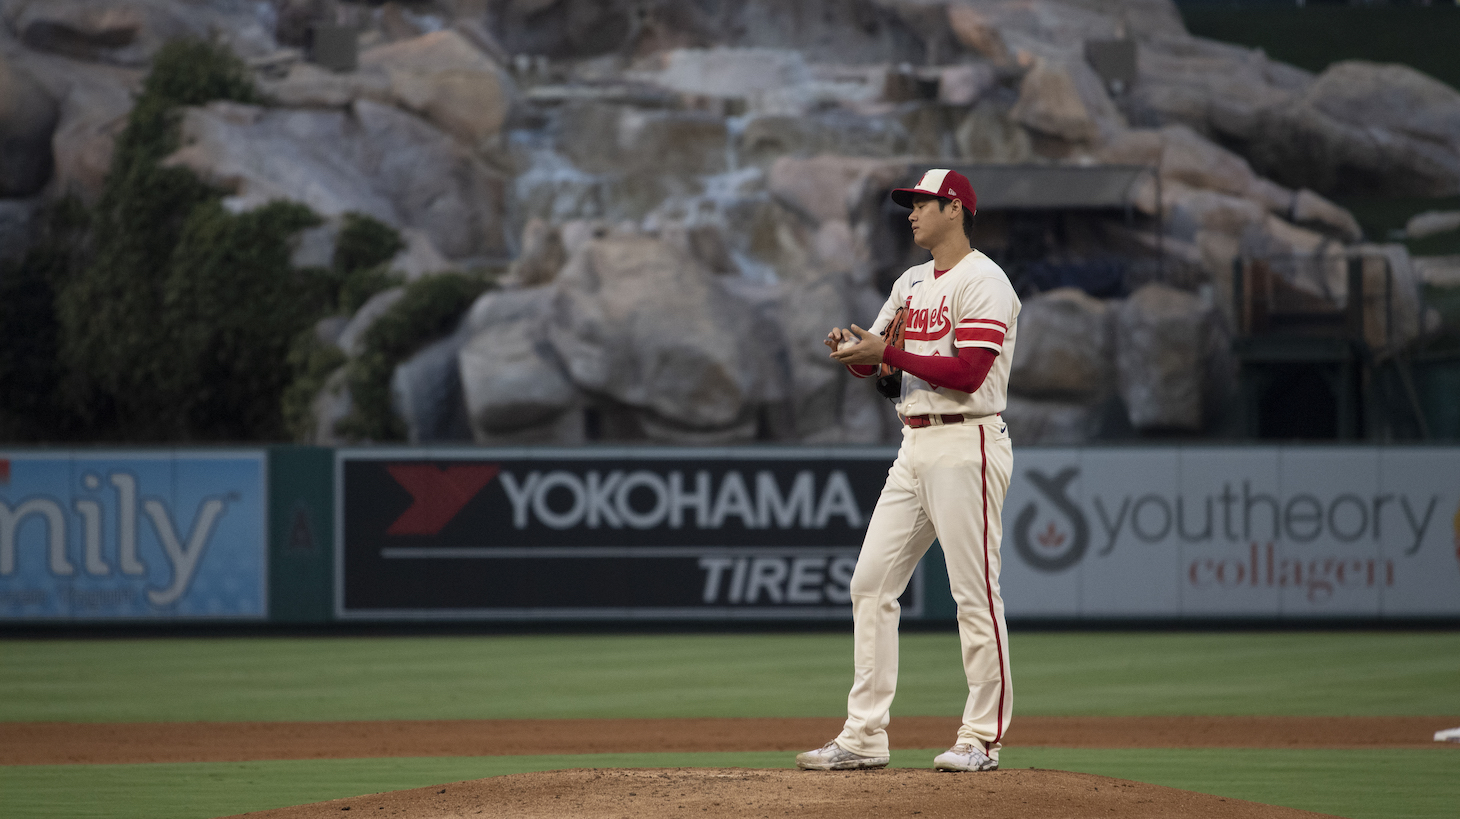 ANAHEIM, CA - AUGUST 03: Shohei Ohtani #17 waits for the next batter in the fourth inning while playing the Oakland Athletics at Angel Stadium of Anaheim on August 3, 2022 in Anaheim, California. (Photo by John McCoy/Getty Images)